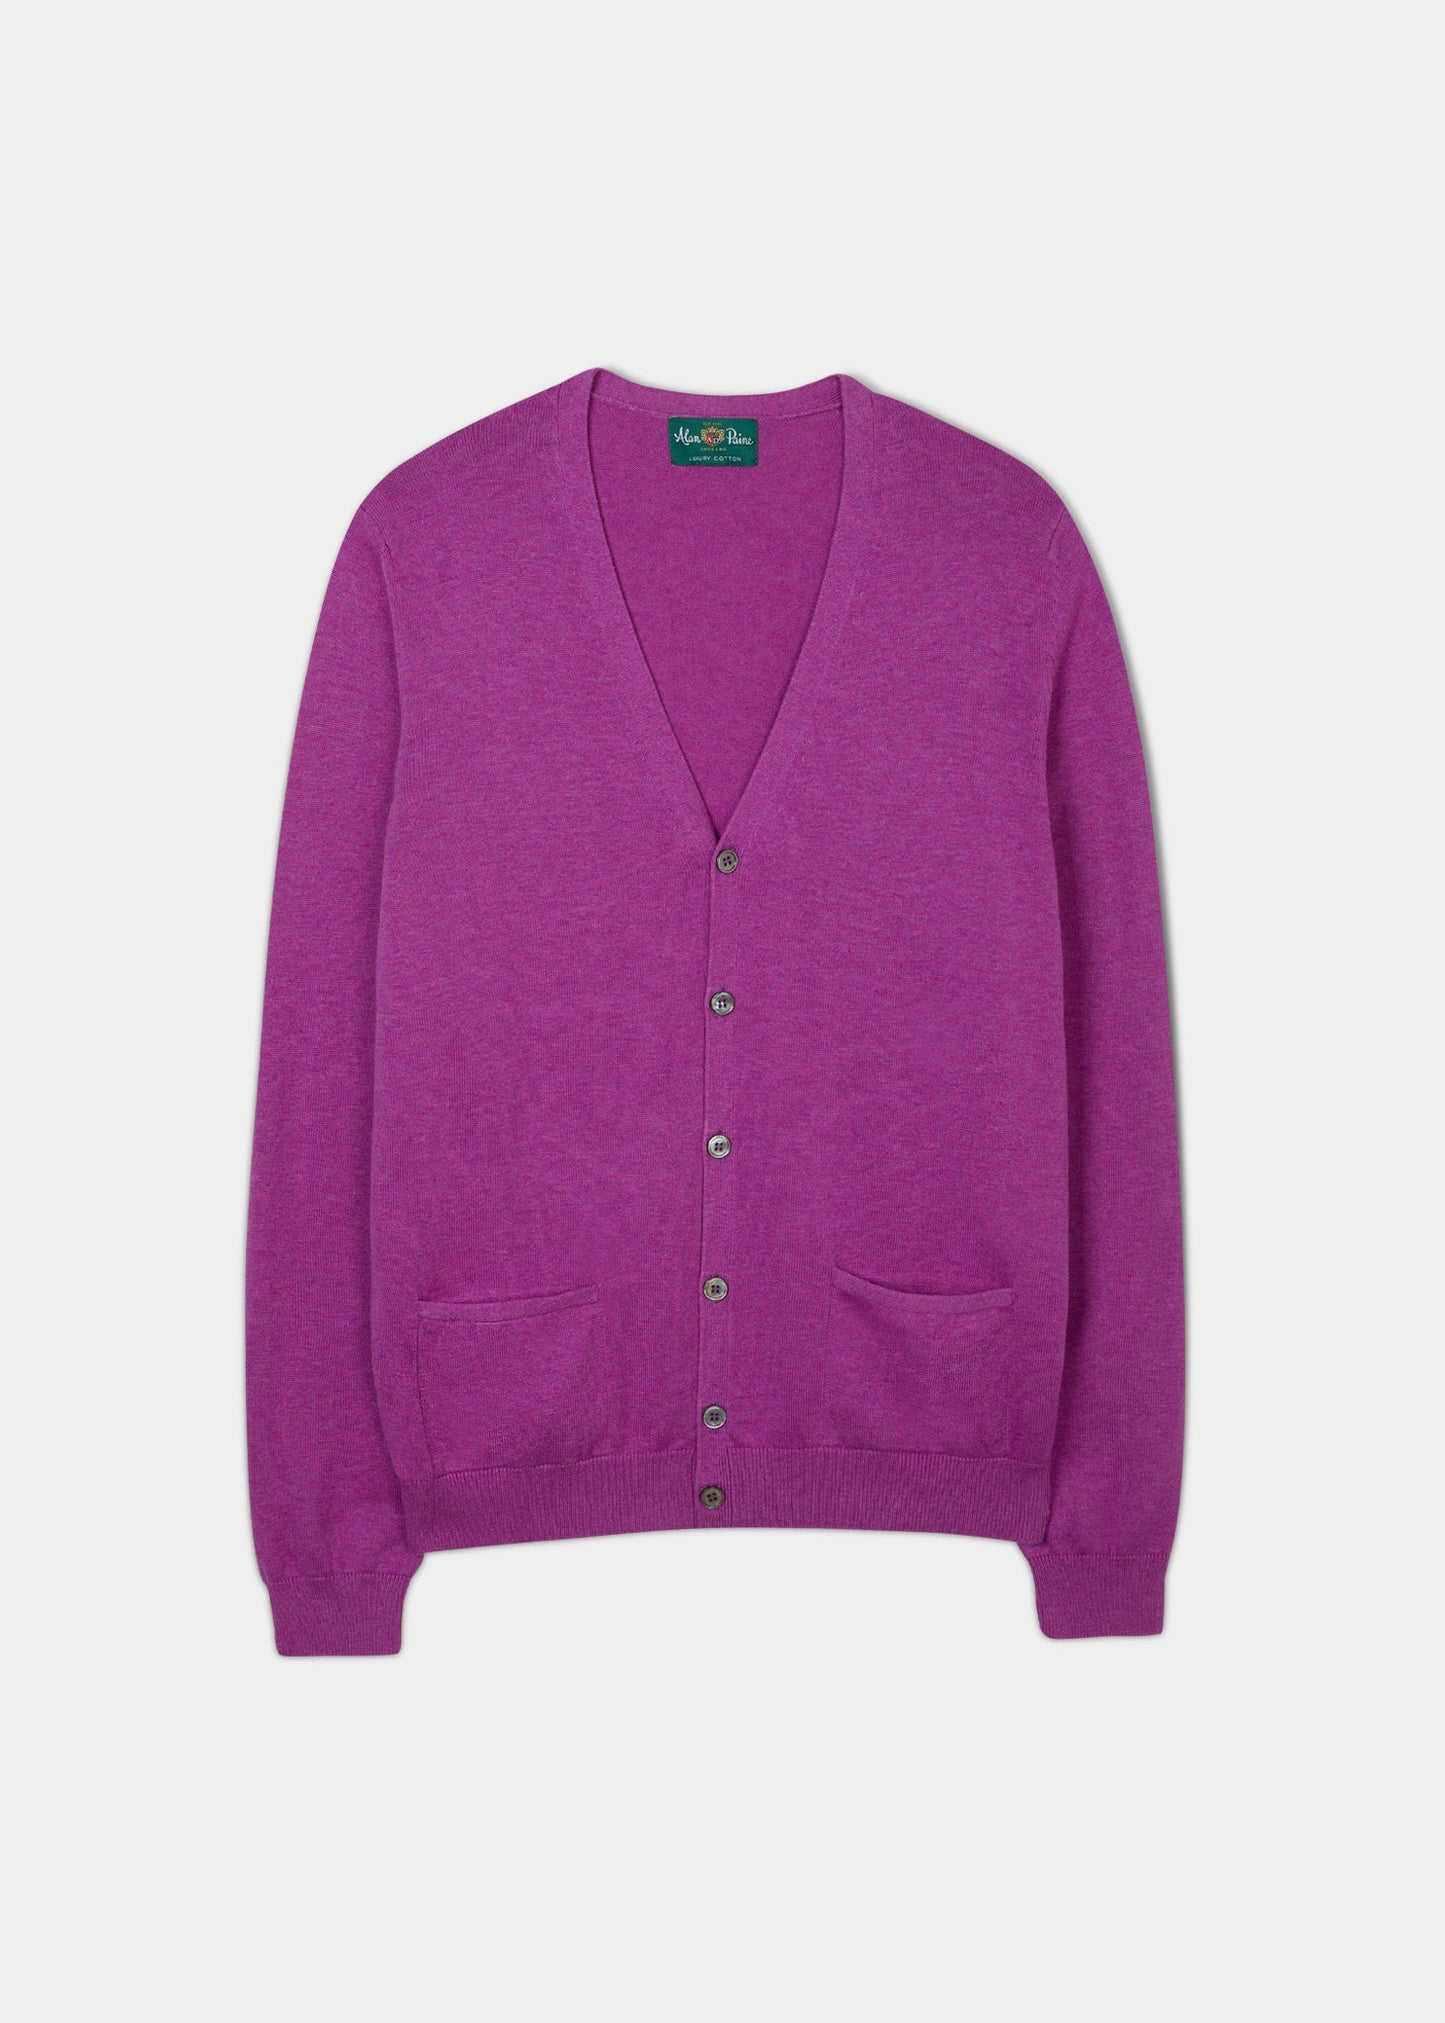 Alan Paine cotton cashmere cardigan in orchid